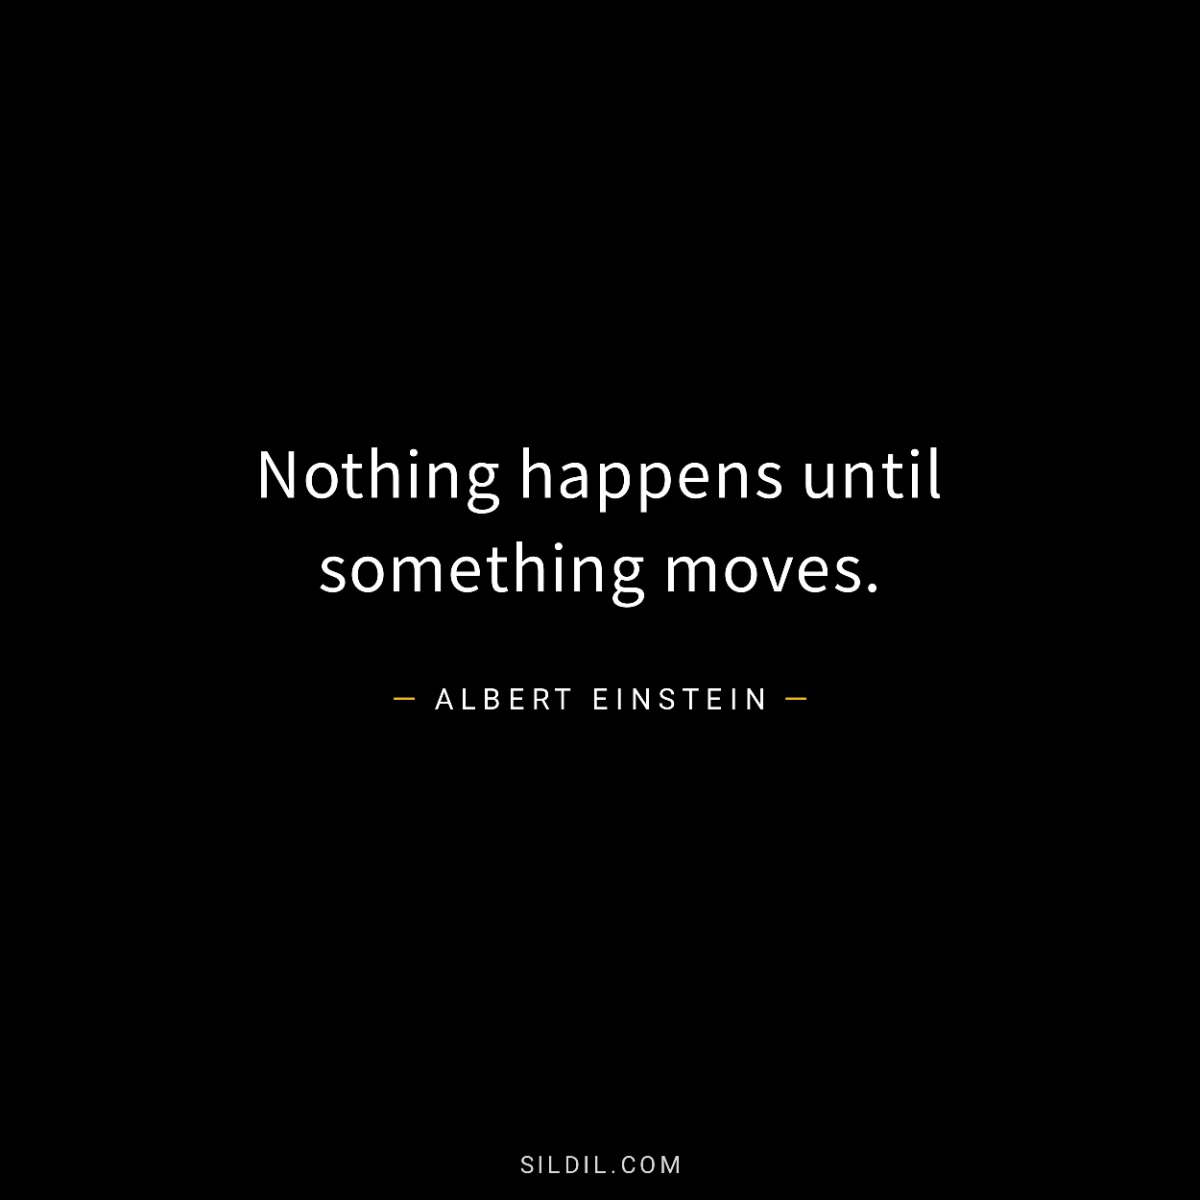 Nothing happens until something moves.